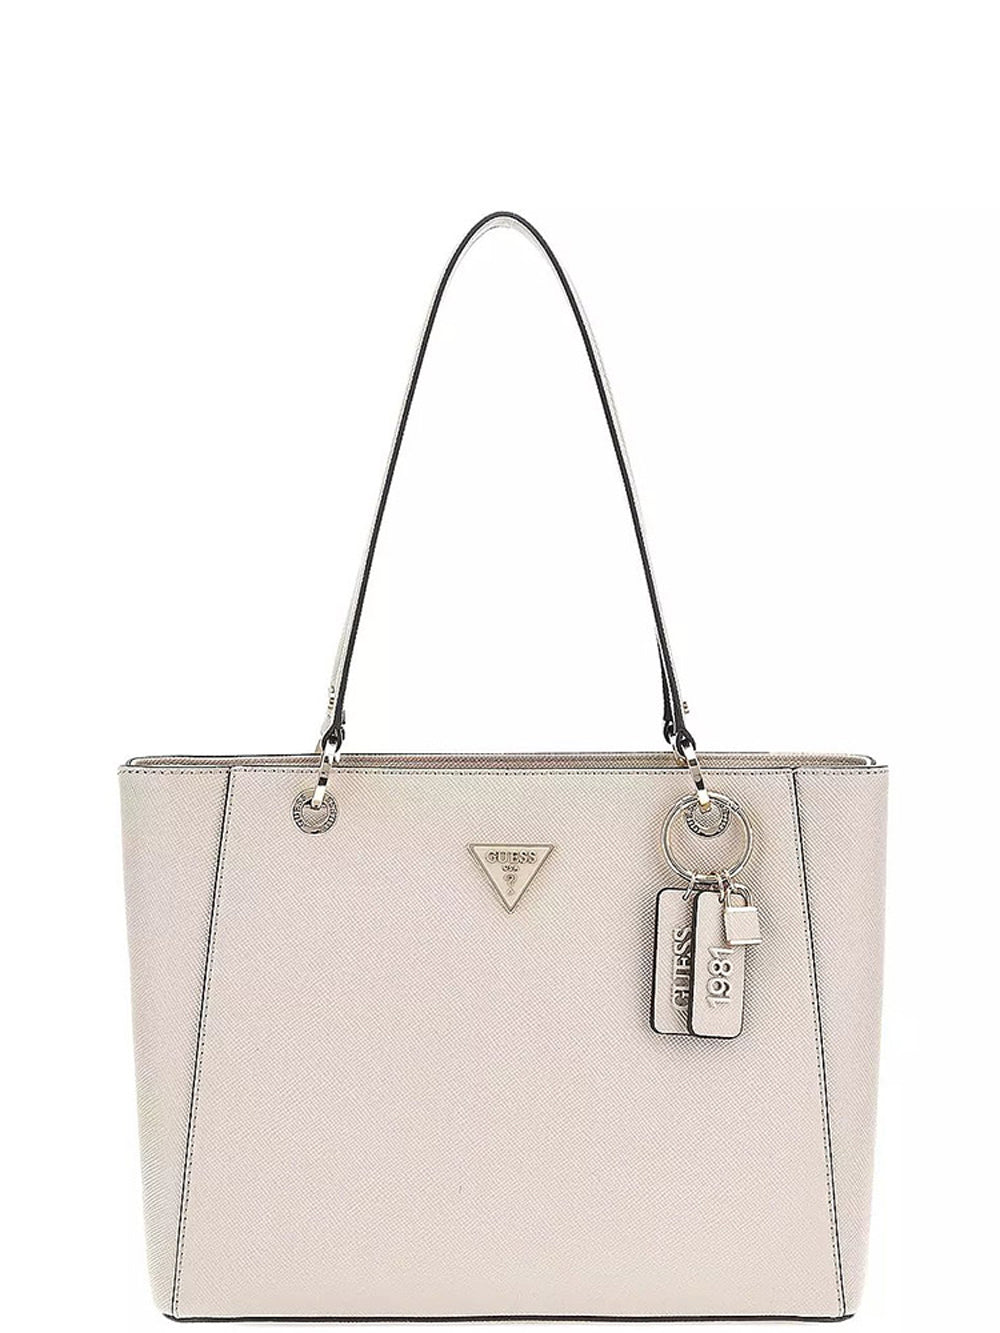 GUESS ACC D PRE Shopping bag noelle tote